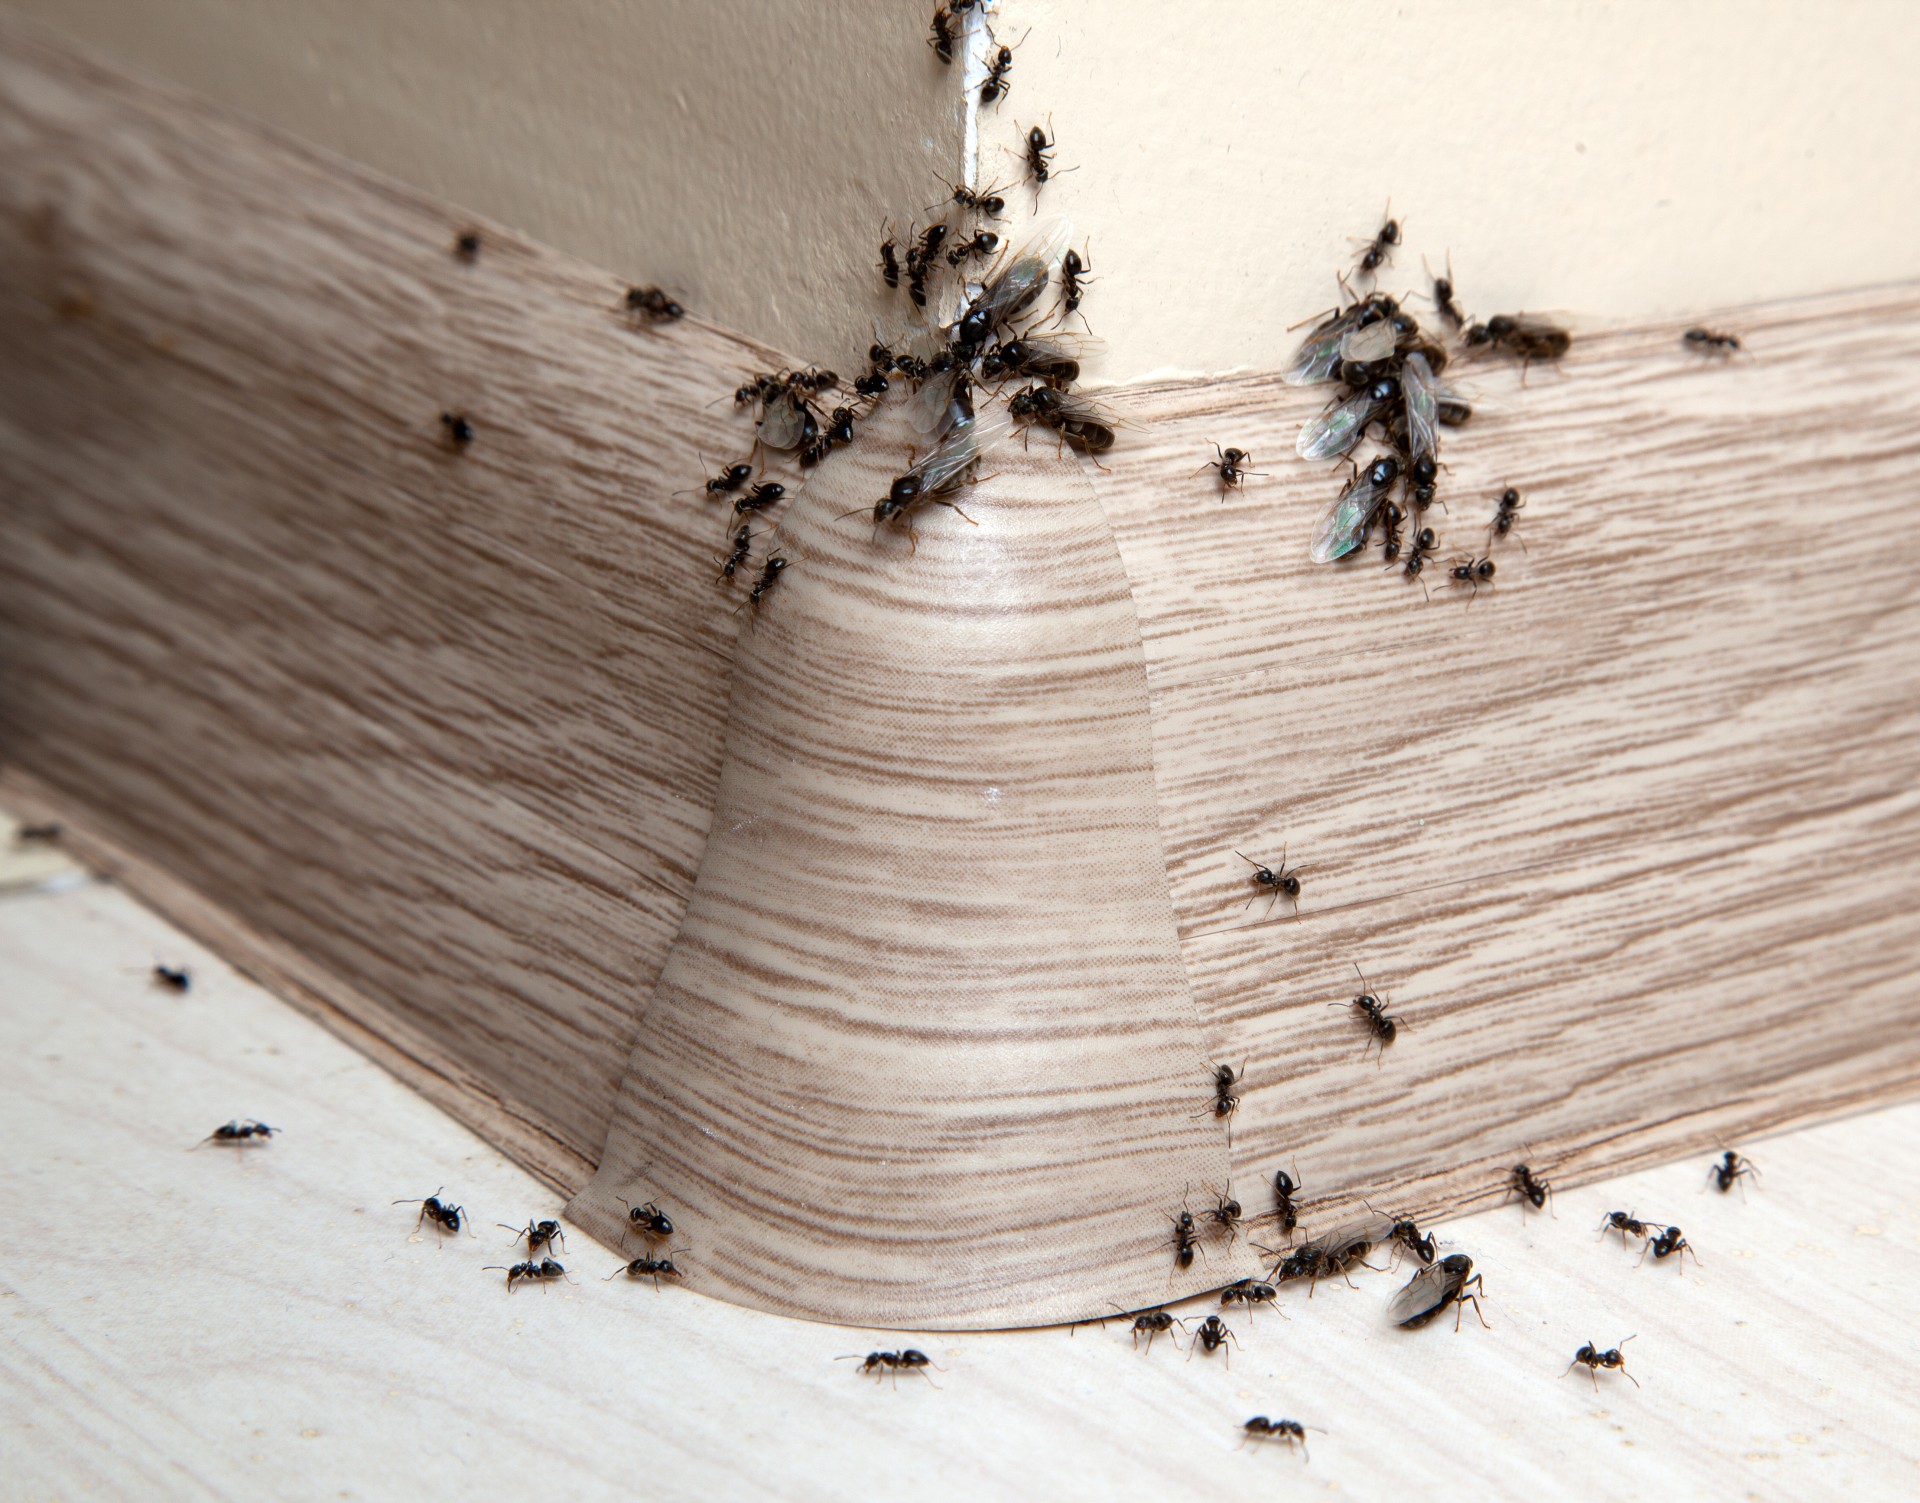 Ant Infestation, Pest Control in Bromley, Bickley, Downham, BR1. Call Now 020 8166 9746